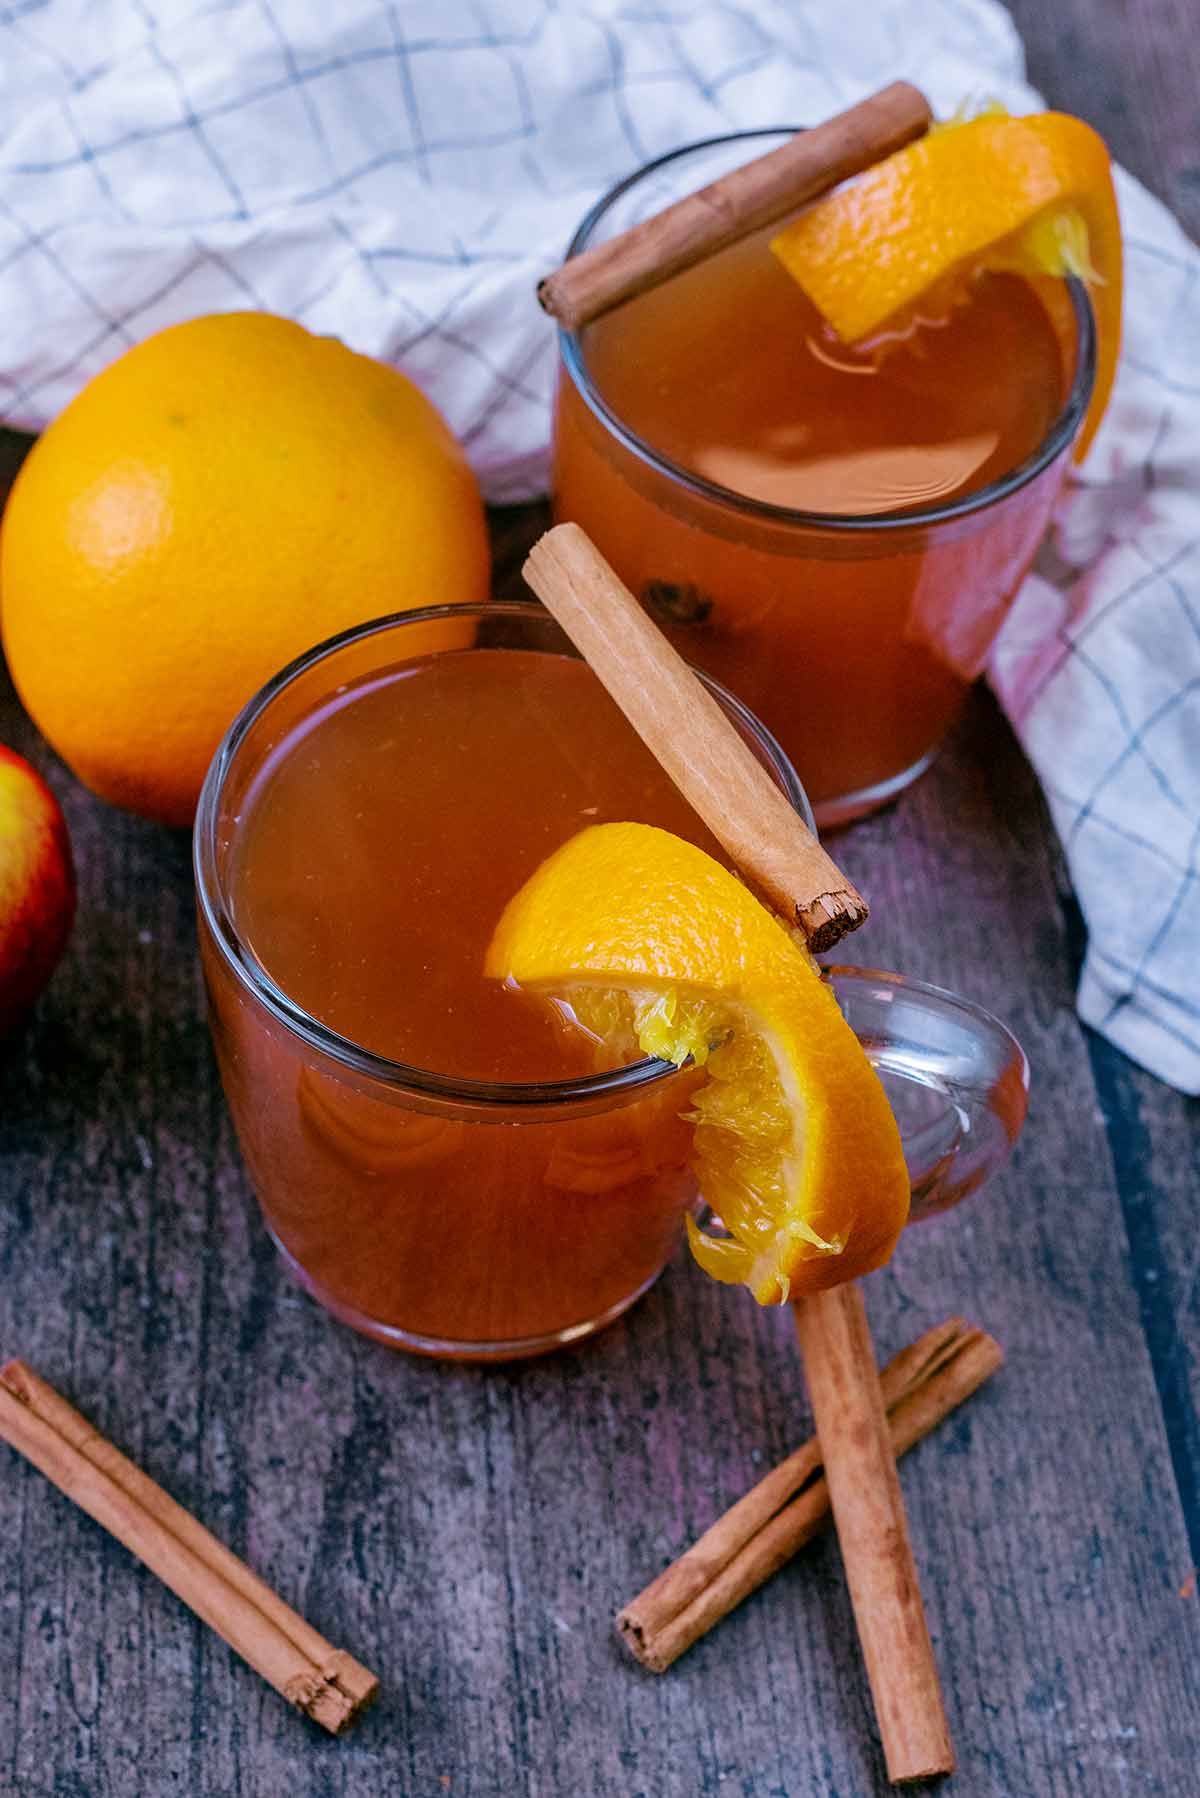 Cinnamon stick and a sliced orange on top of a glass of mulled cider.